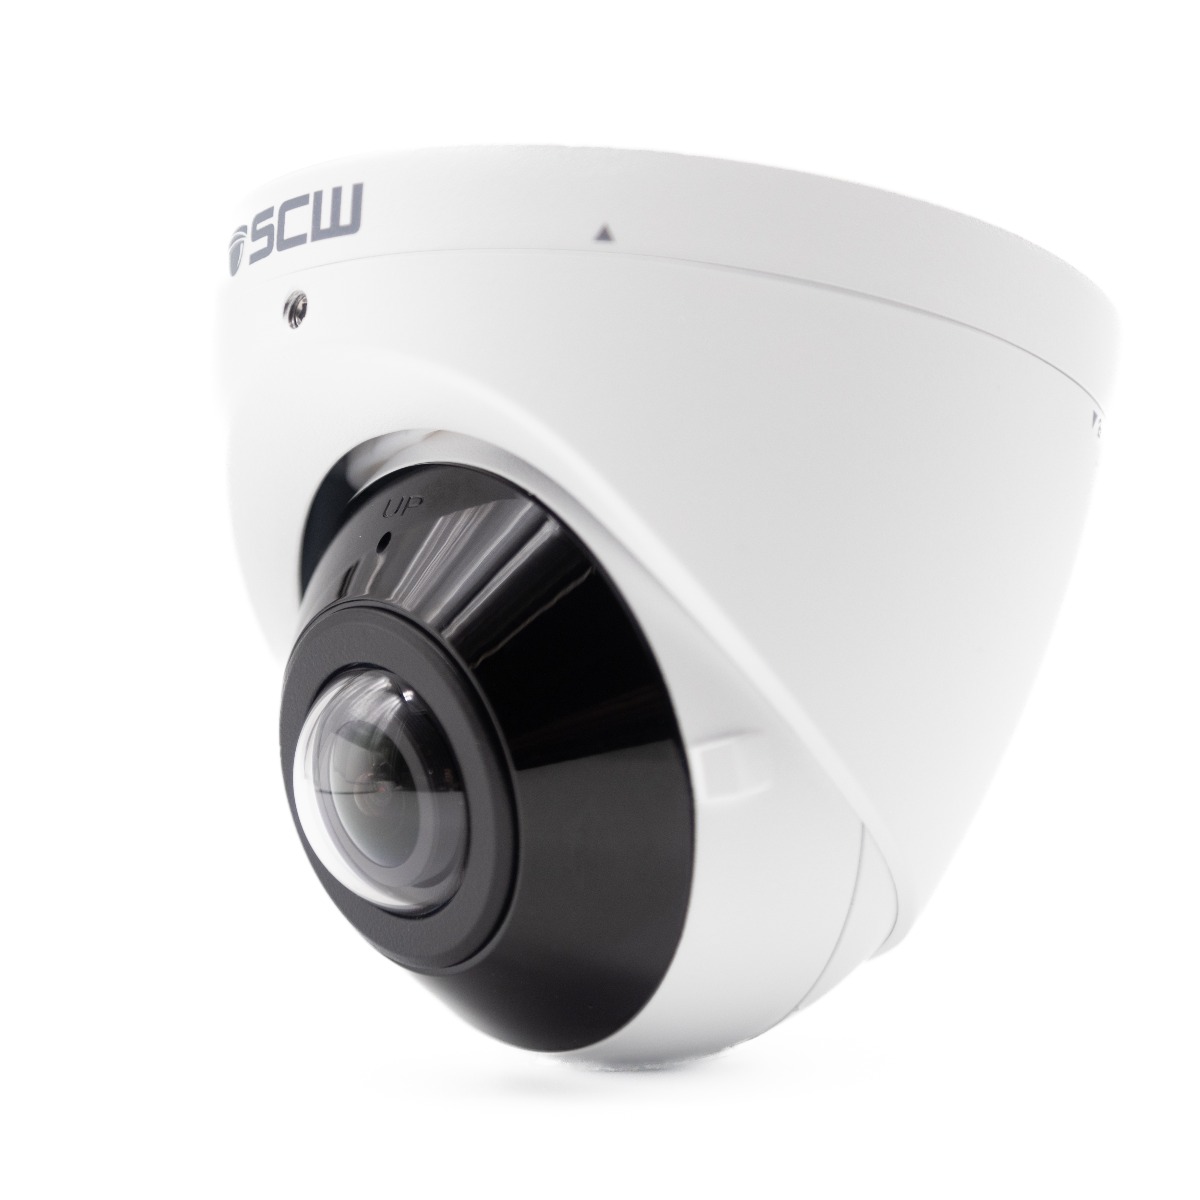 The Scout 5.0 180° Ultra Wide Angle Turret Camera